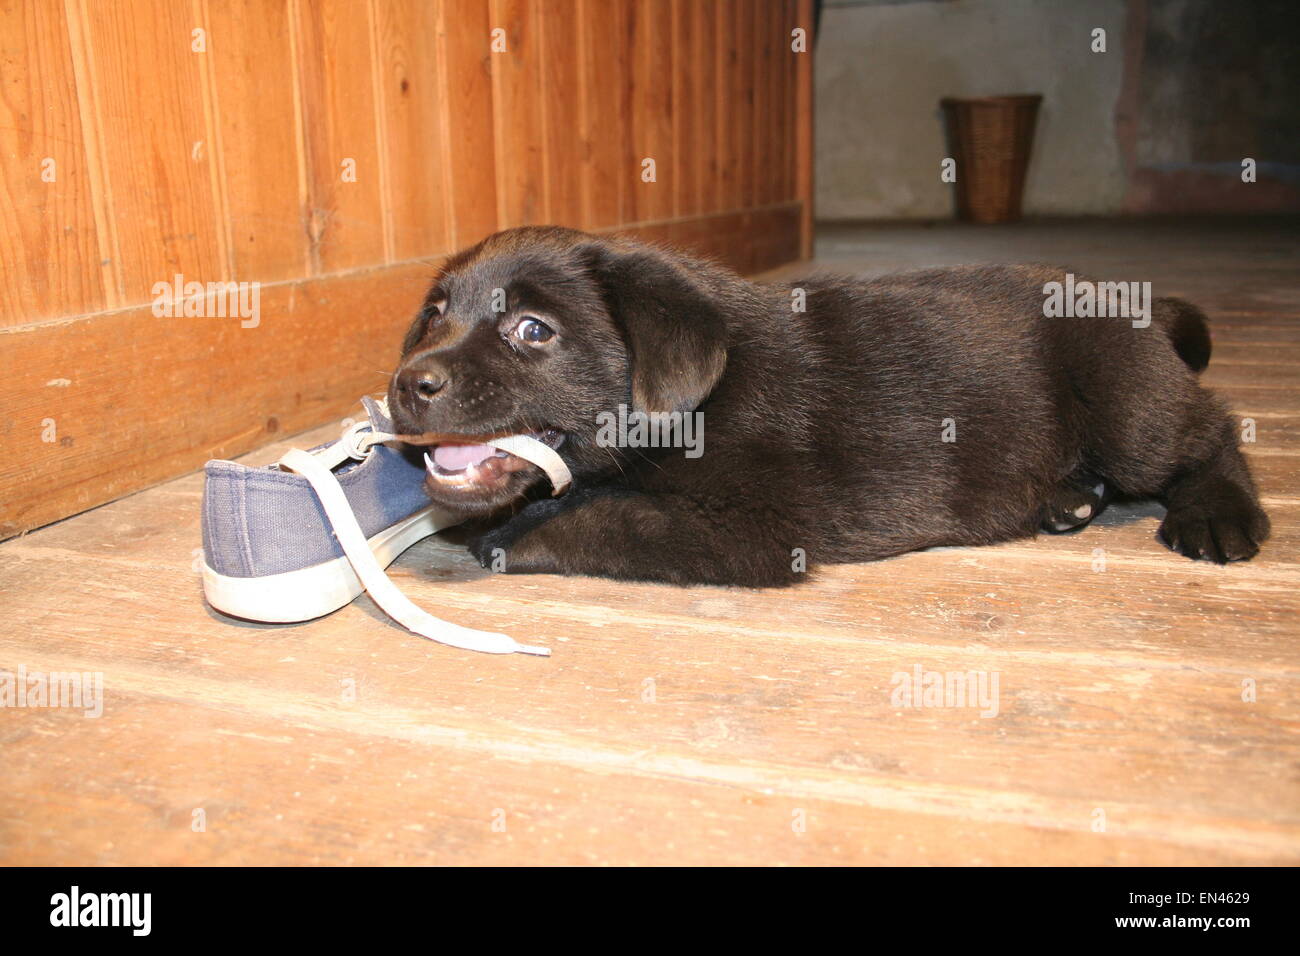 Puppy chewing my shoe. Stock Photo